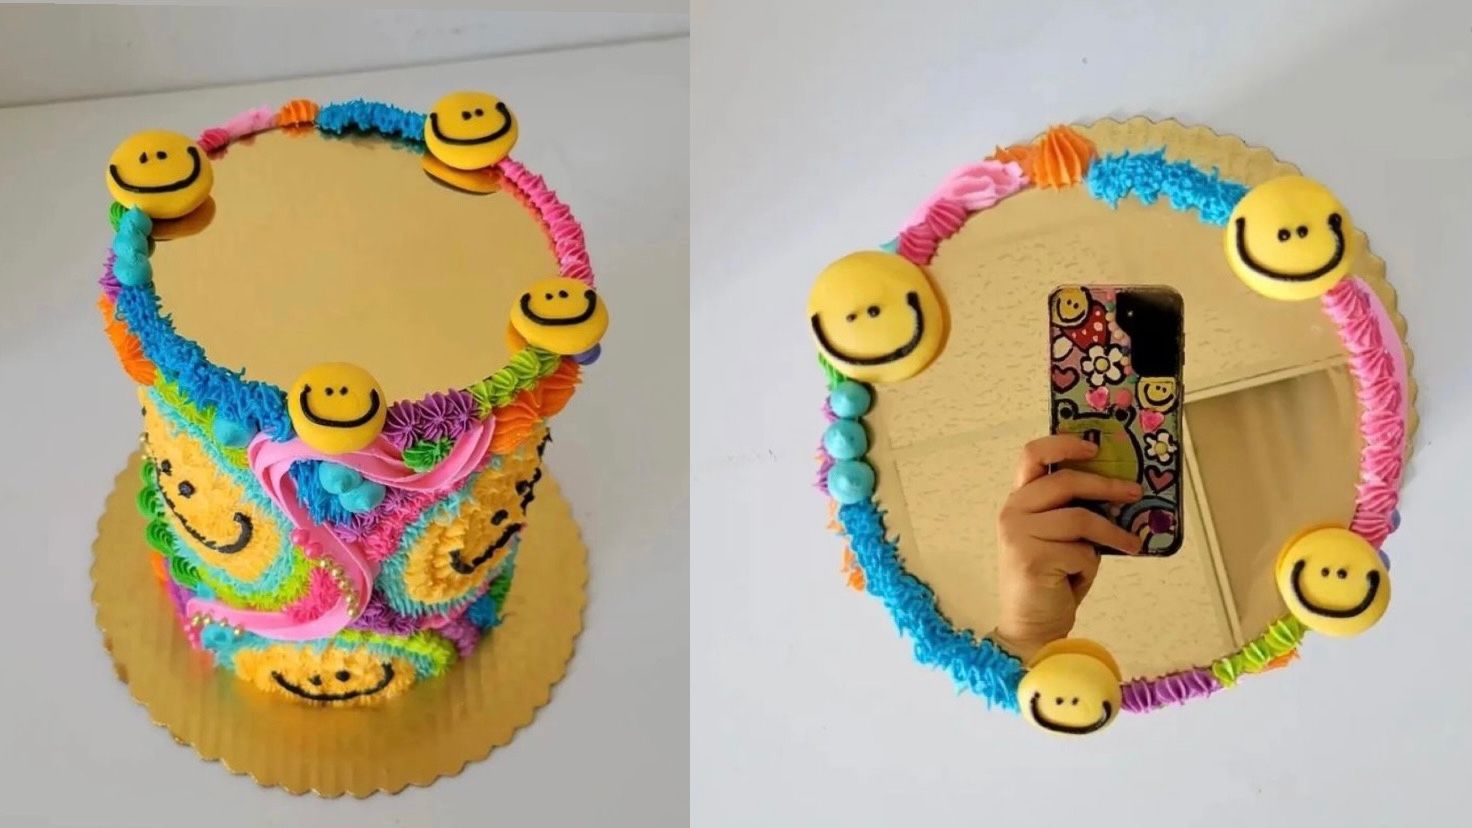 Selfie Cakes Are The New Sweet Obsession On The Dessert Block 